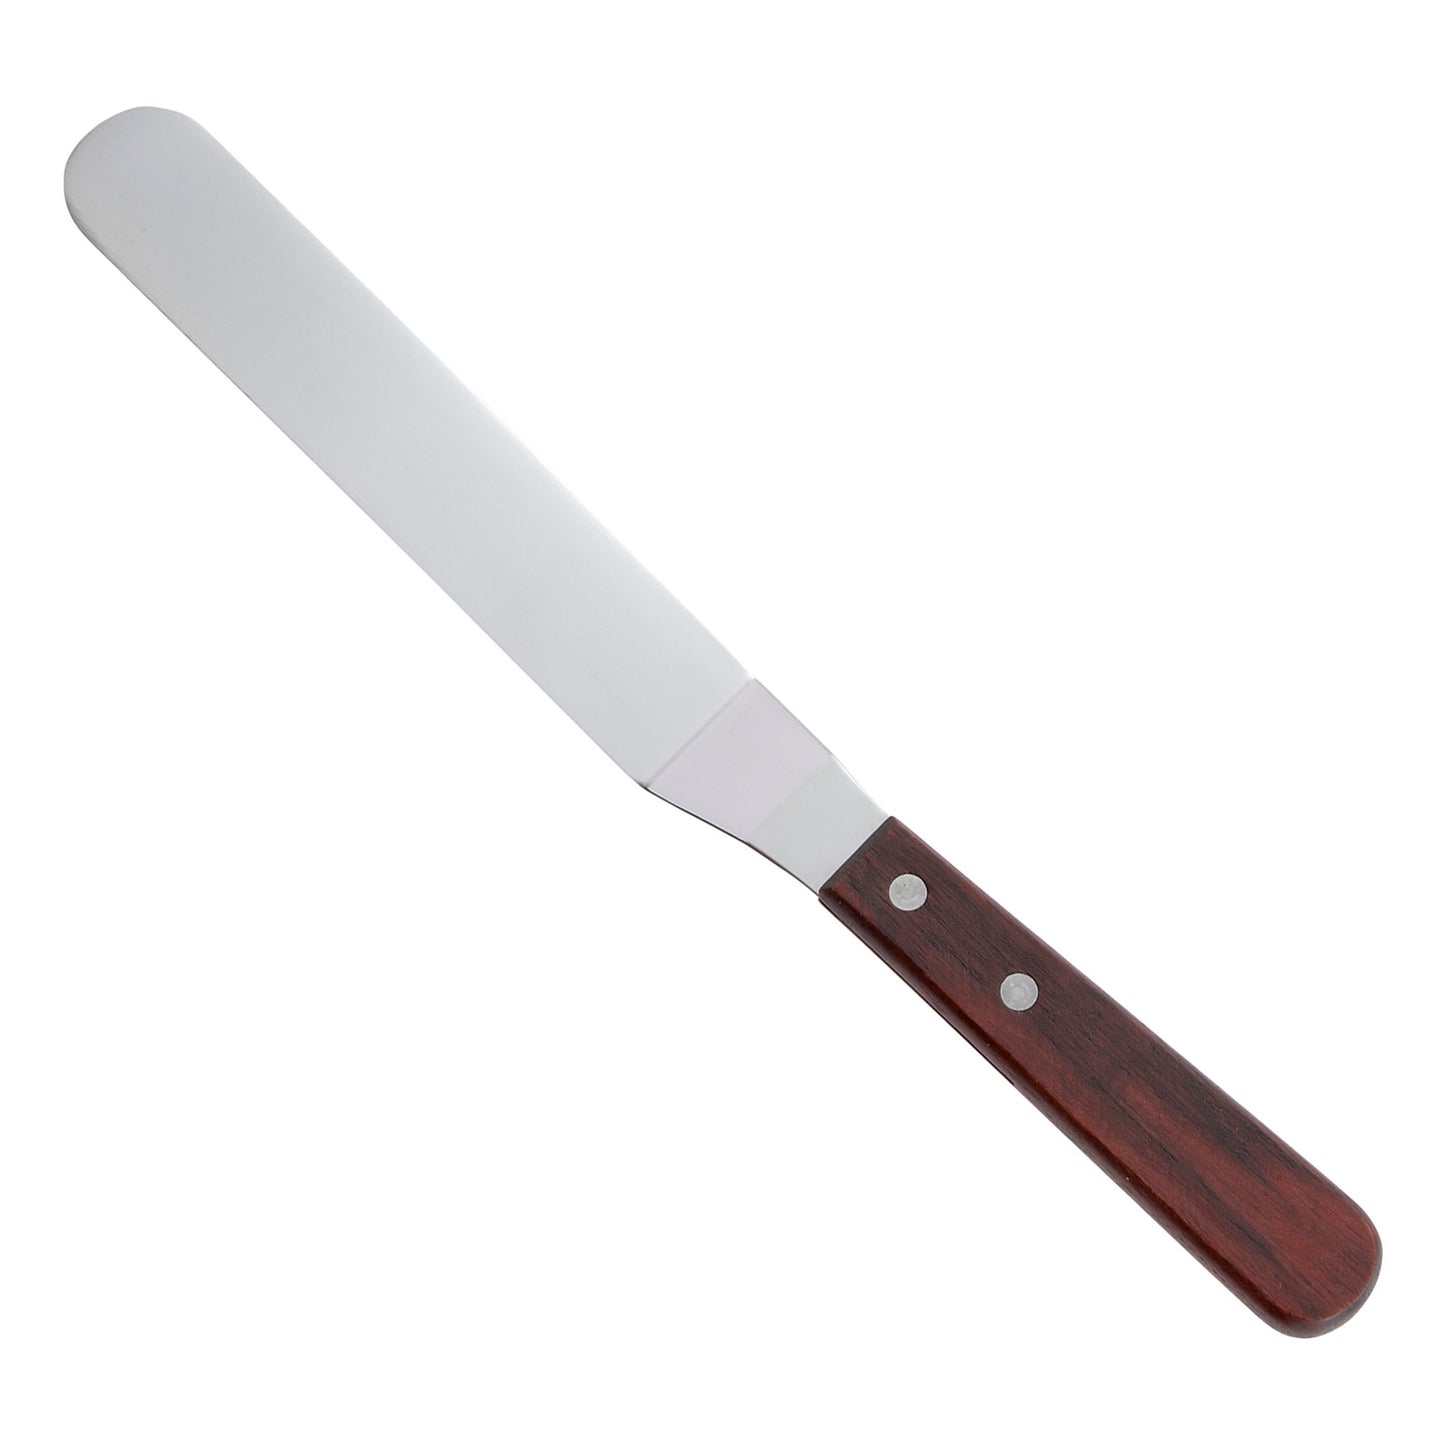 TOS-7 - Spatula with Offset, Wooden Handle - 6-3/8" x 1-1/4"